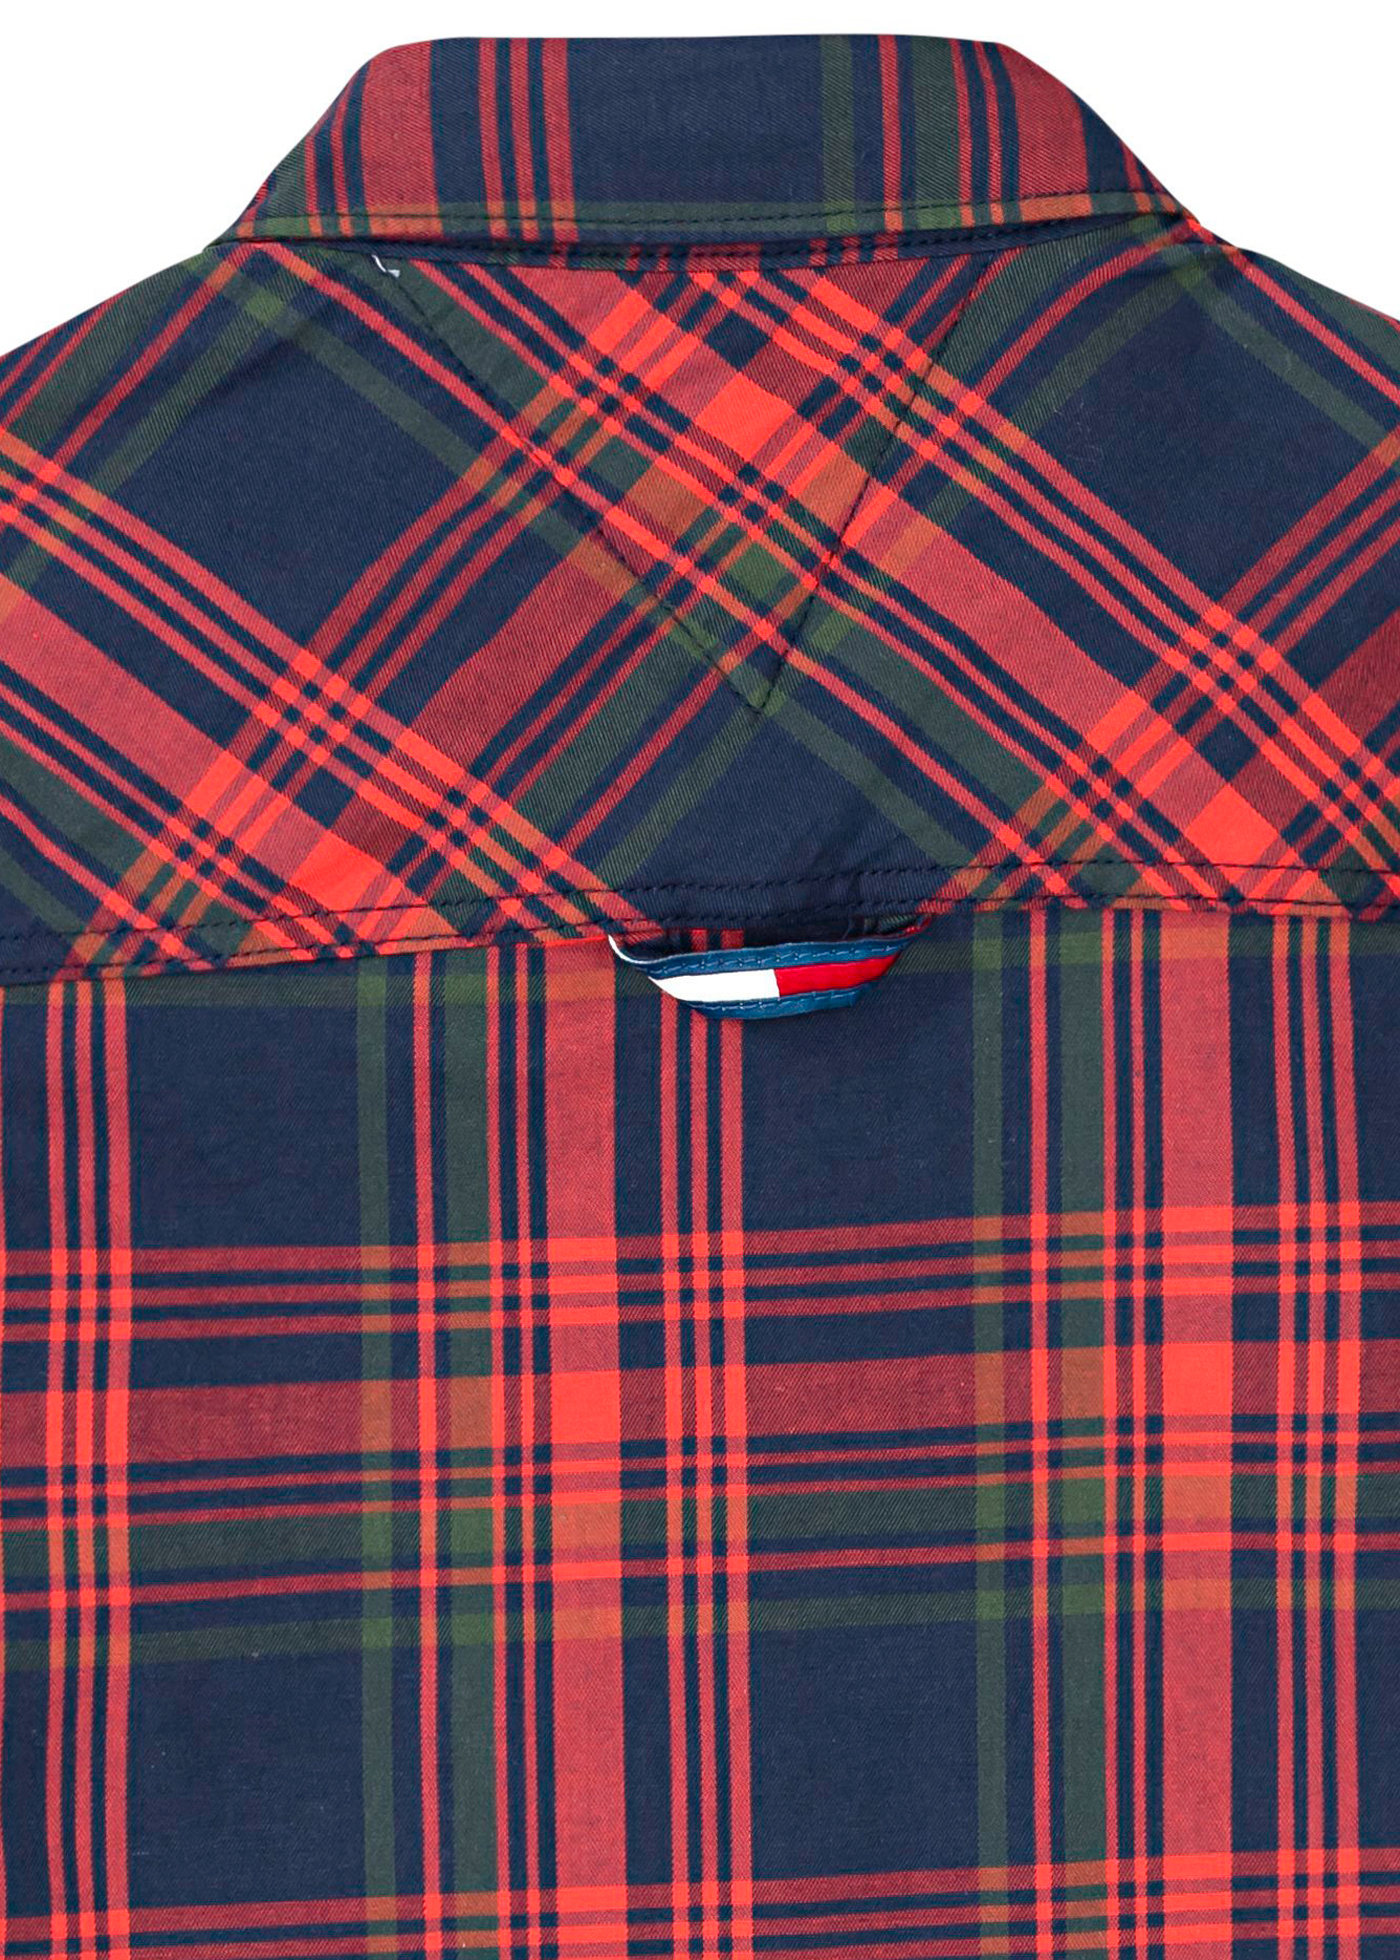 CLASSIC CHECK SHIRT L/S image number 3